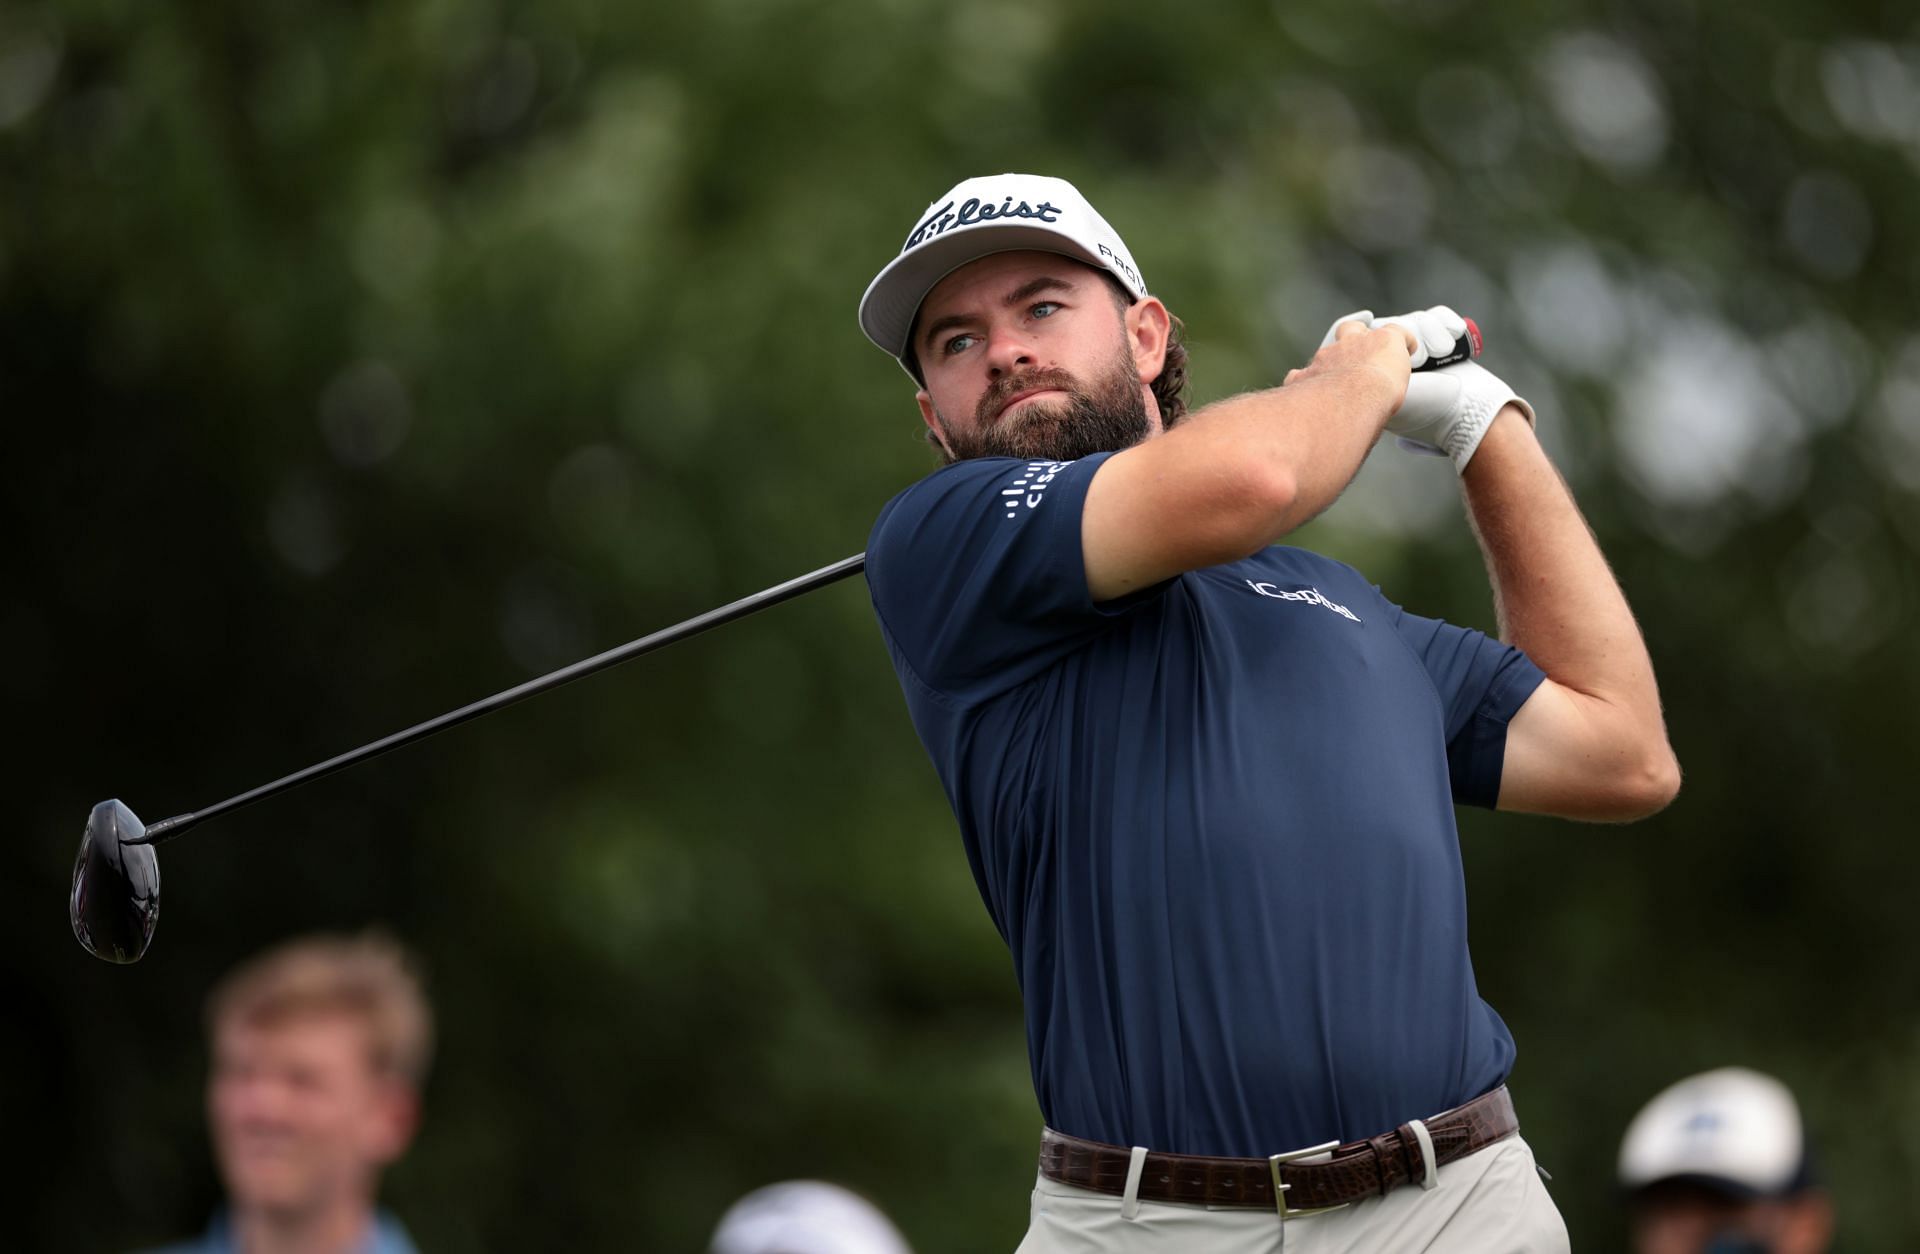 Cameron Young shot well at the Travelers Championship